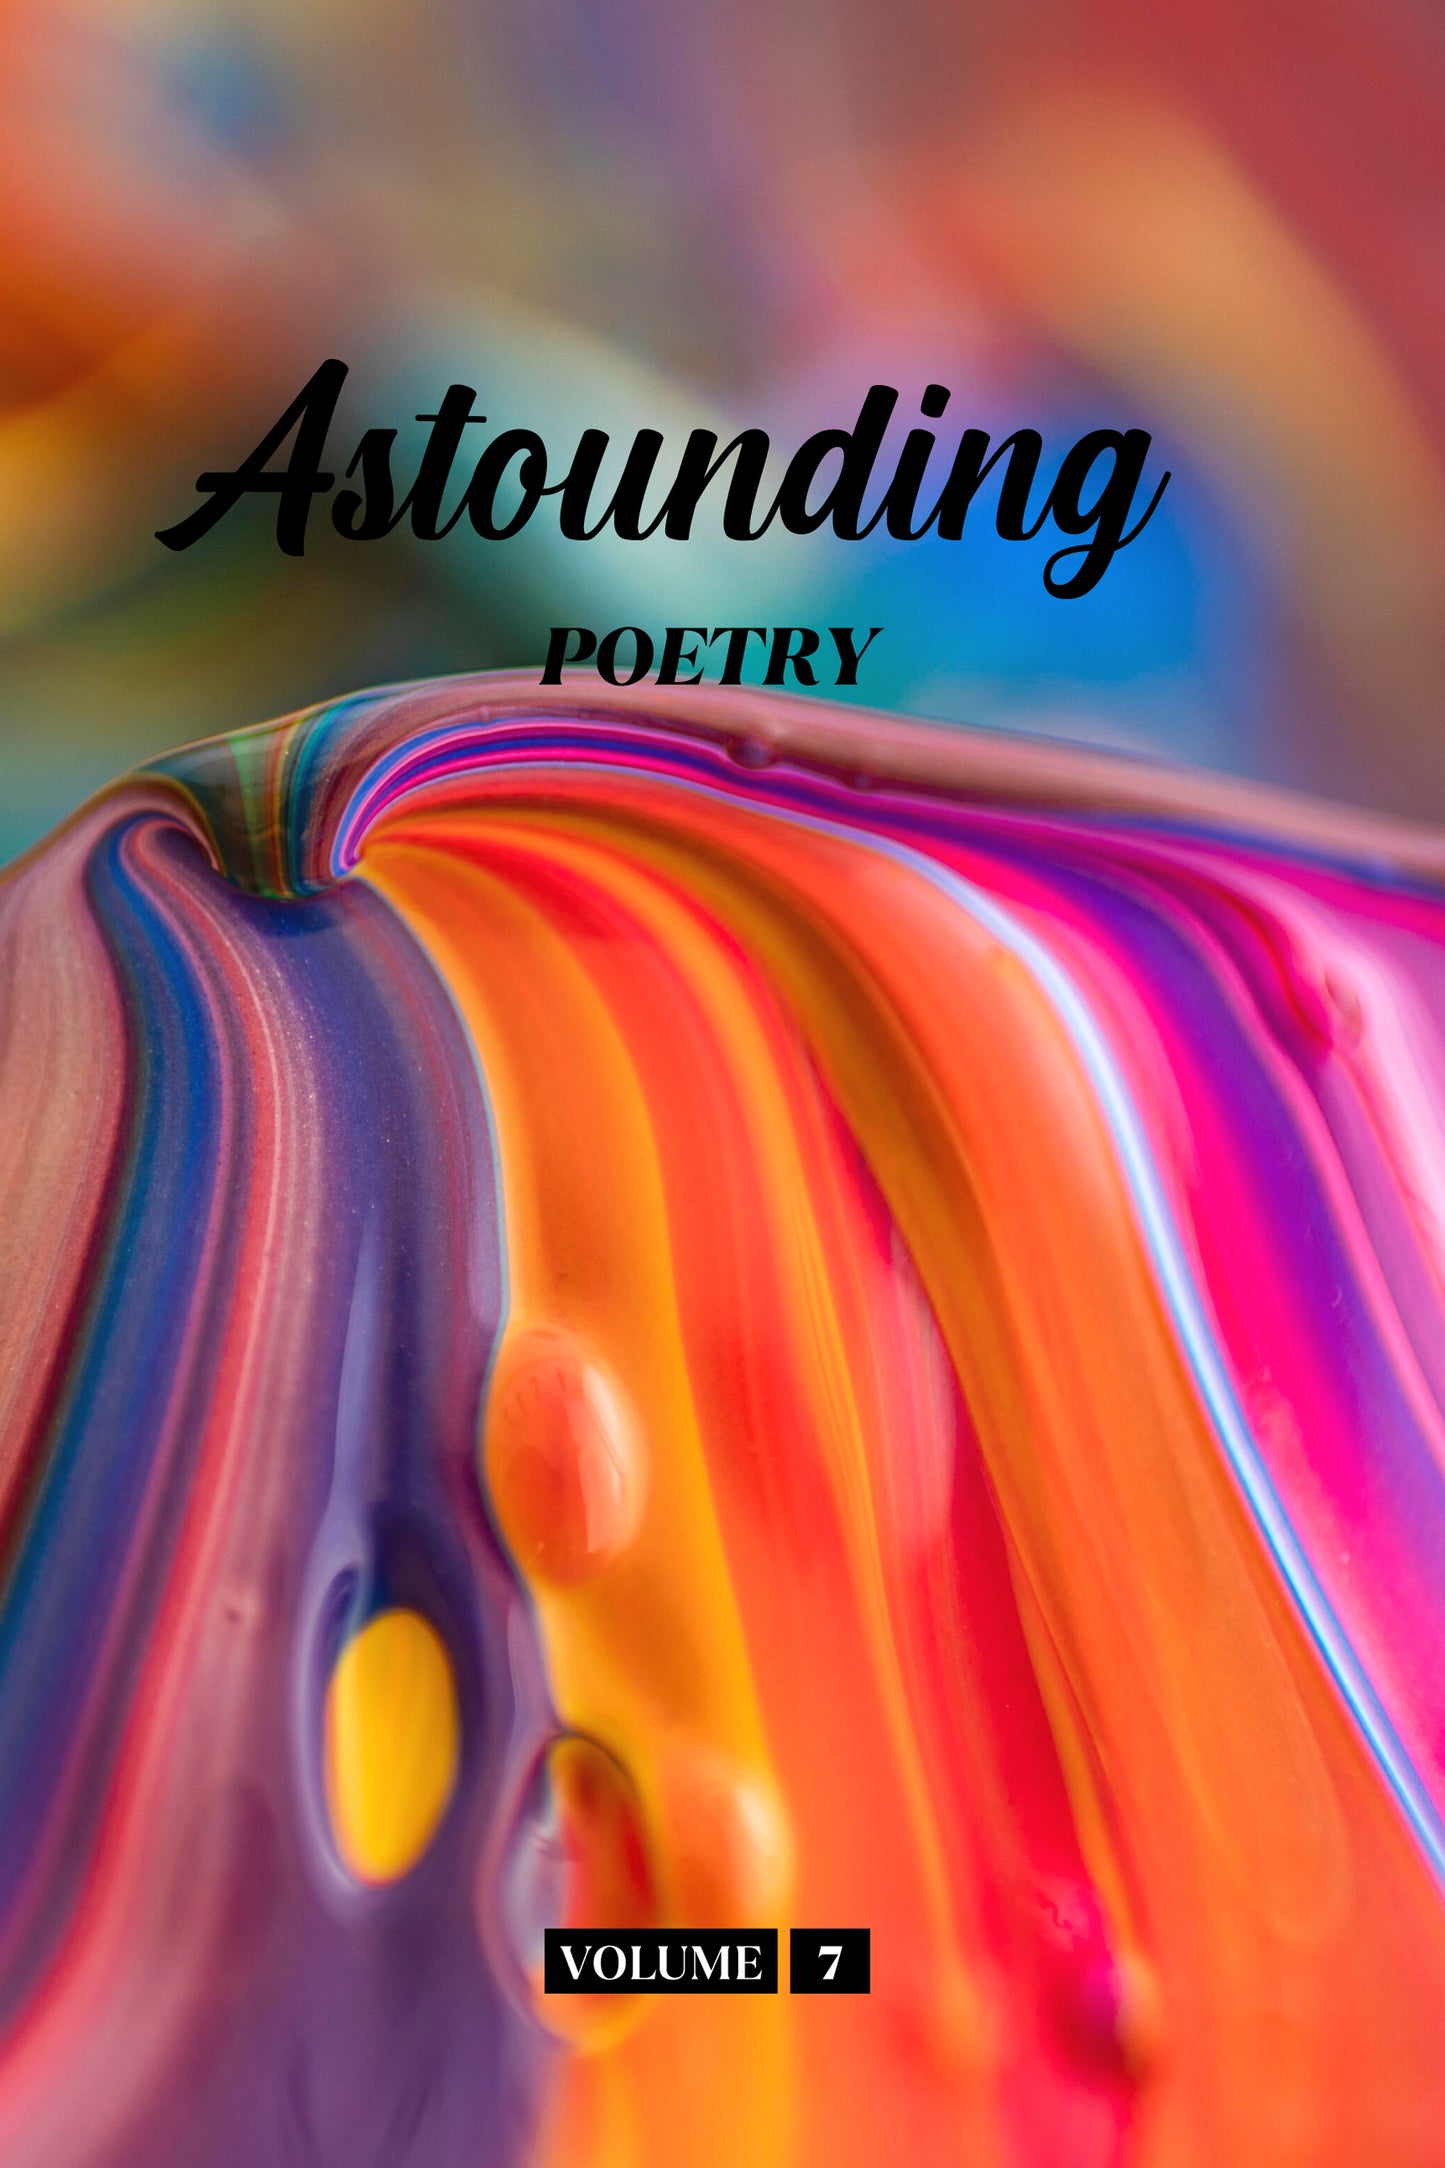 Astounding Poetry (Volume 7) - Physical Book